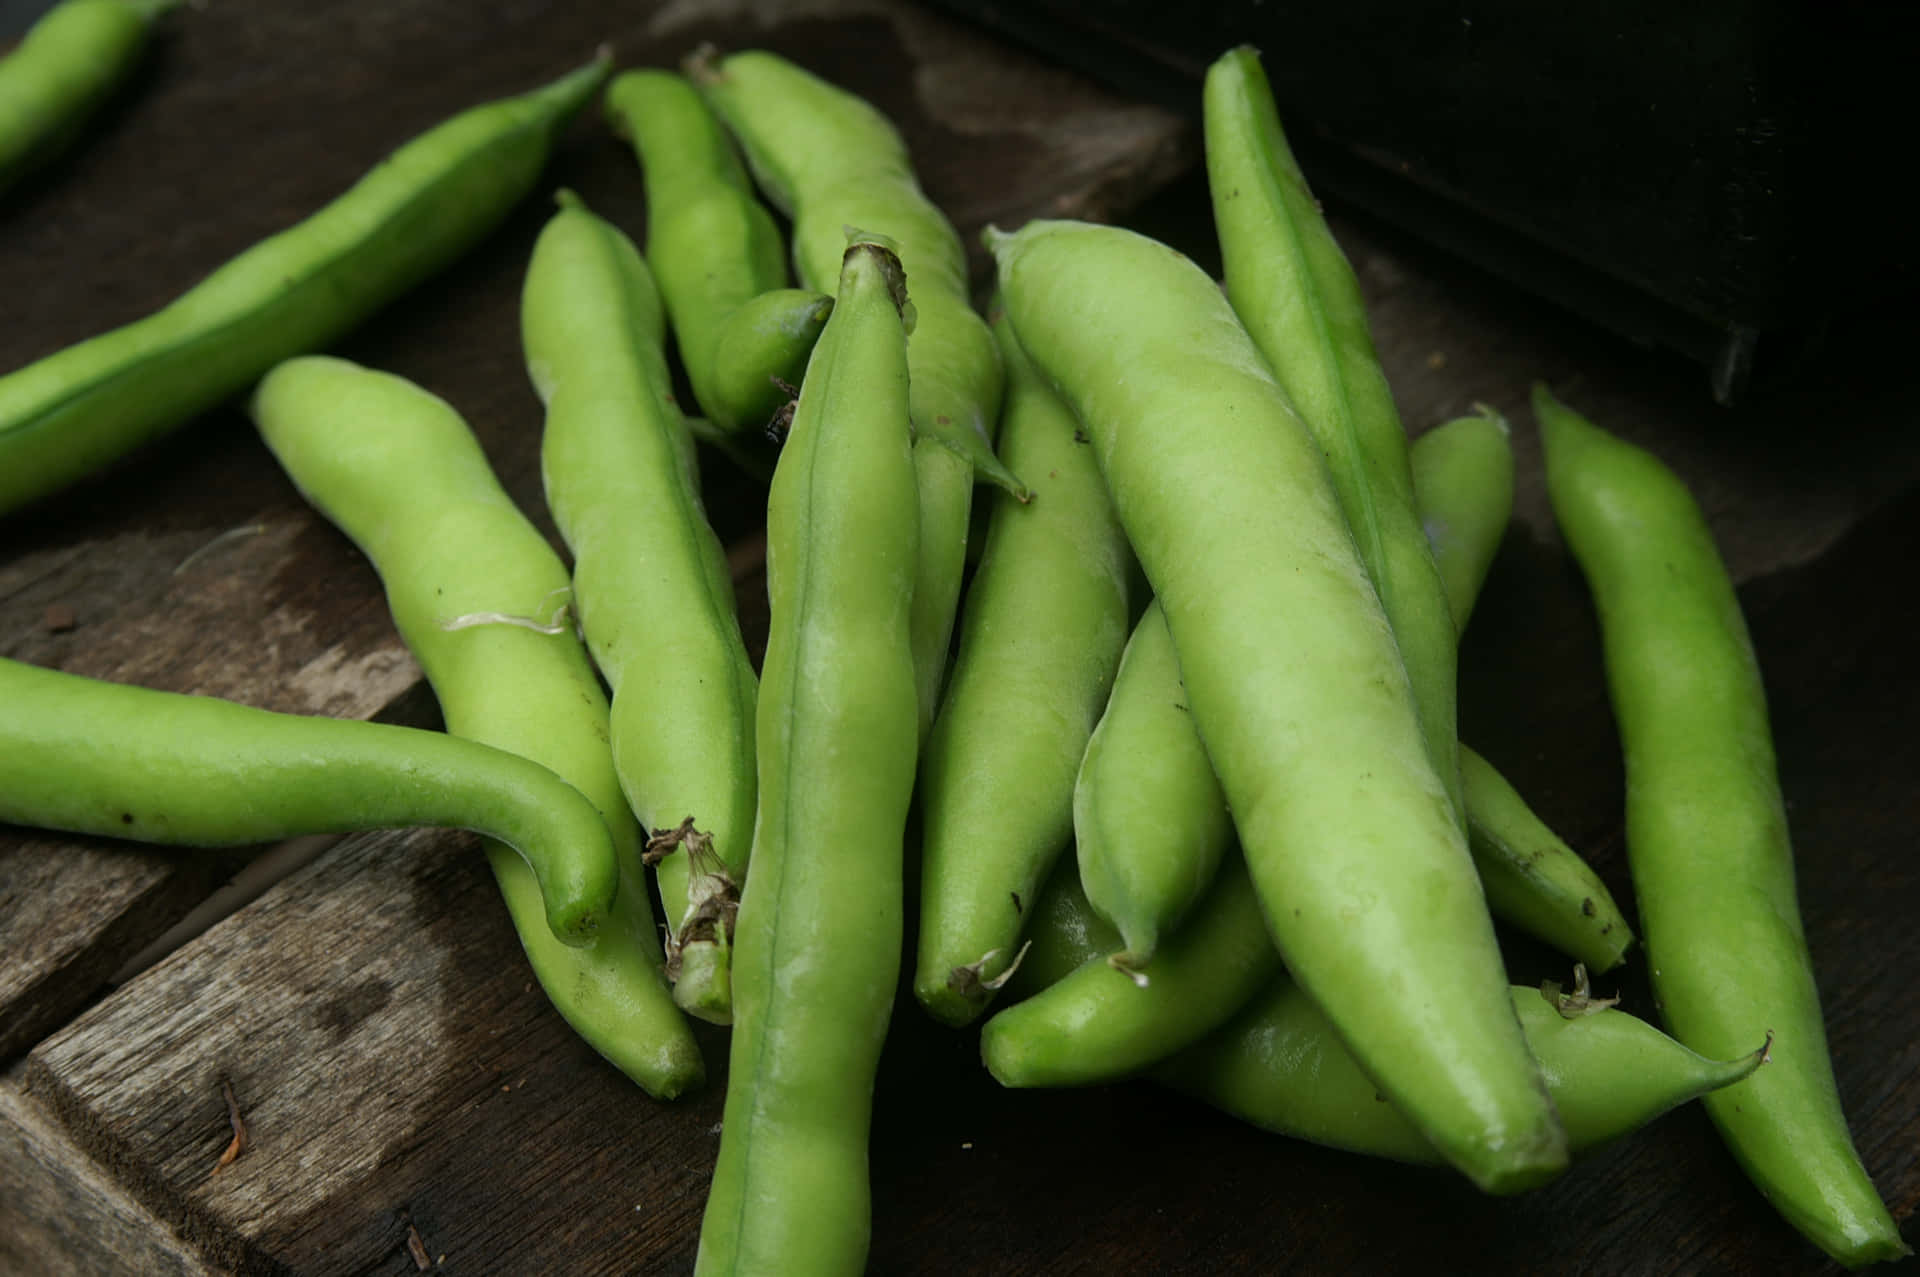 An array of different beans bursting with nutrition and flavor.